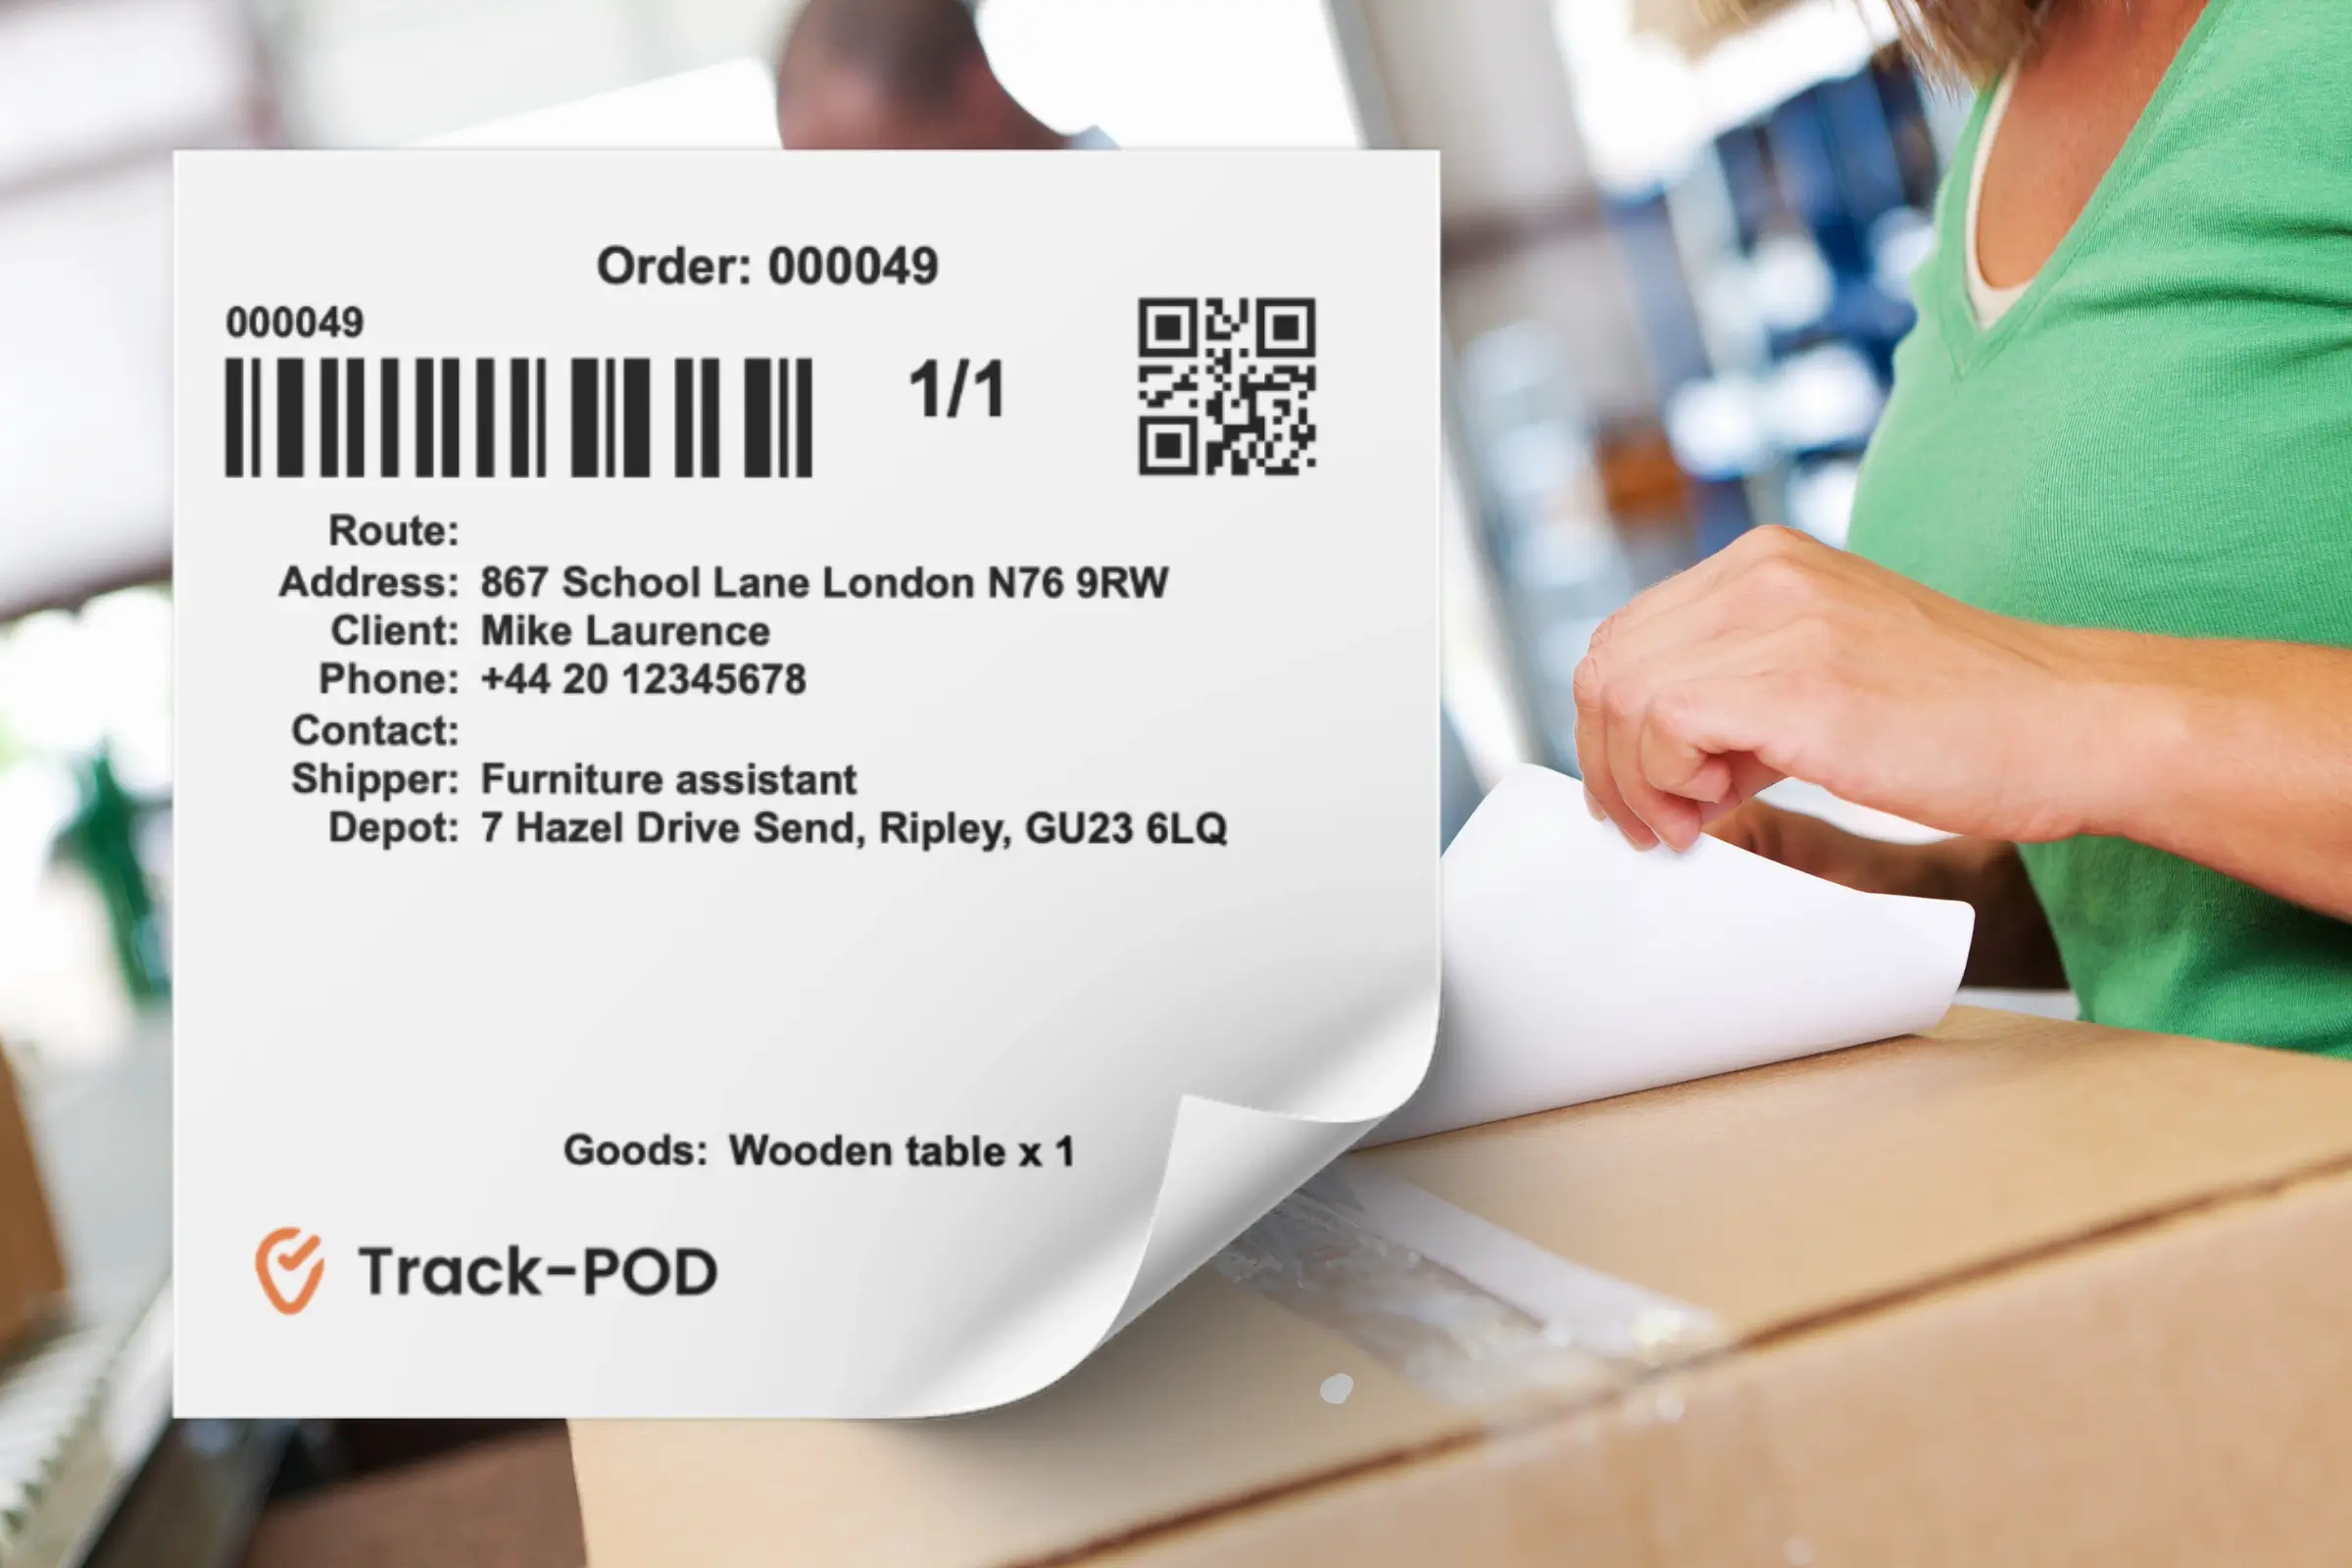 Shipping Label Barcode Template Vector Stock Illustration